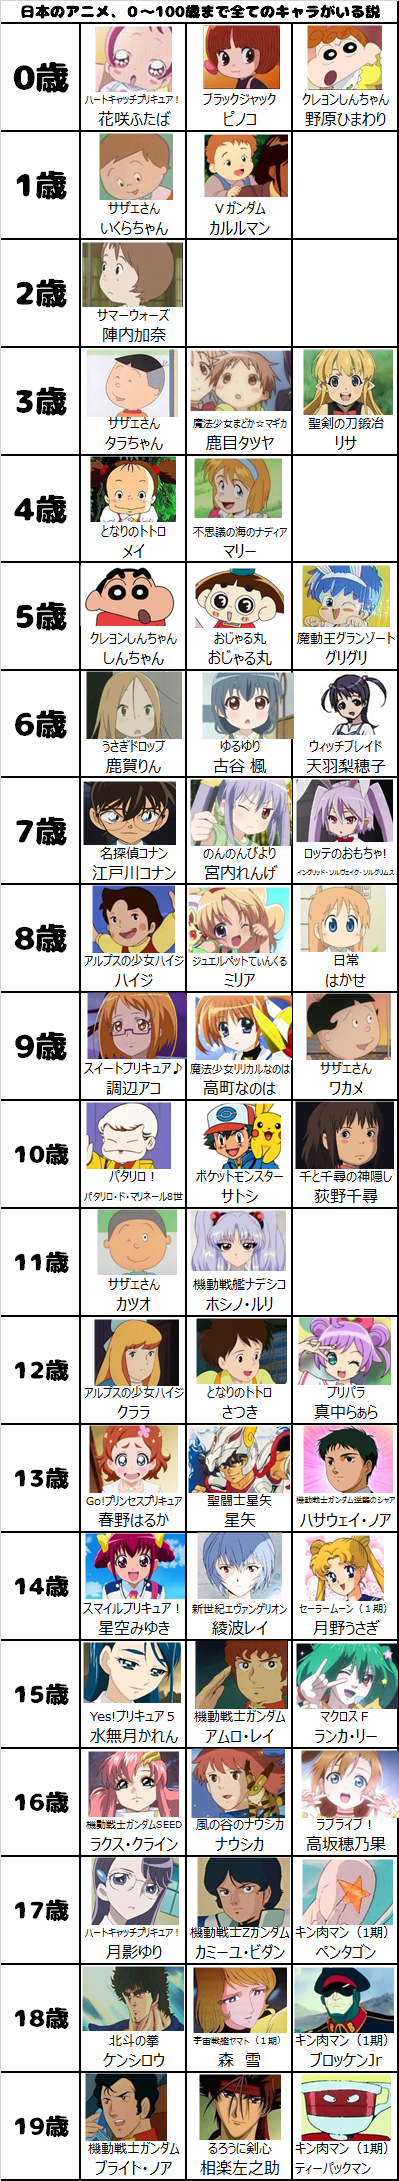 Crunchyroll - Blog Charts Anime Characters Aged 0 To 100